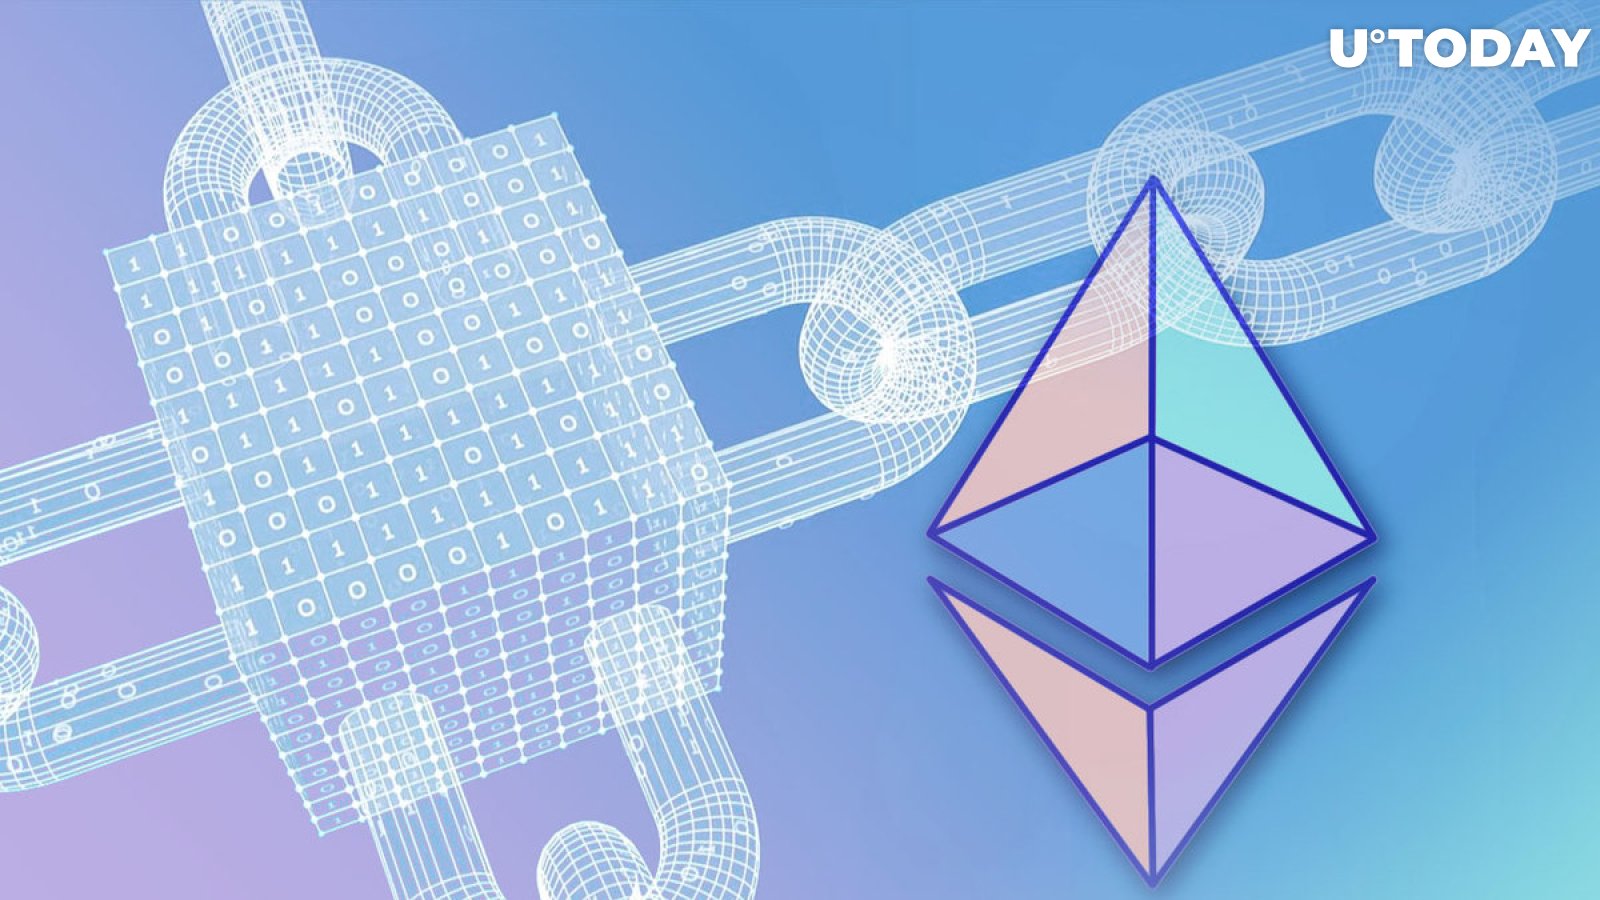 Biggest Ethereum Layer 2 Introduces New Chain with Ultra Low-Cost Transactions